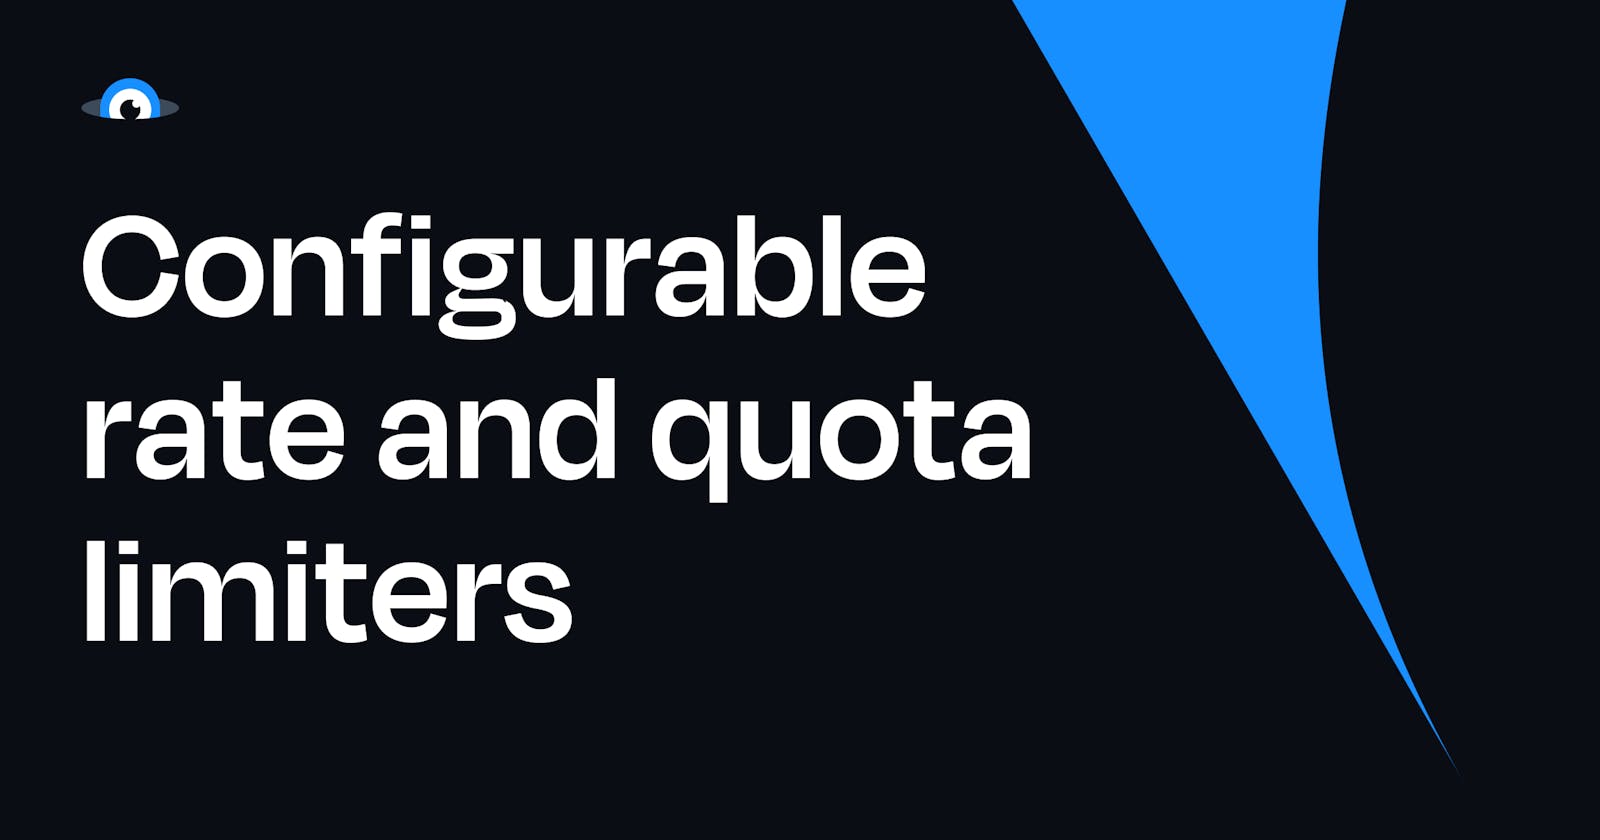 Configurable rate and quota limiters